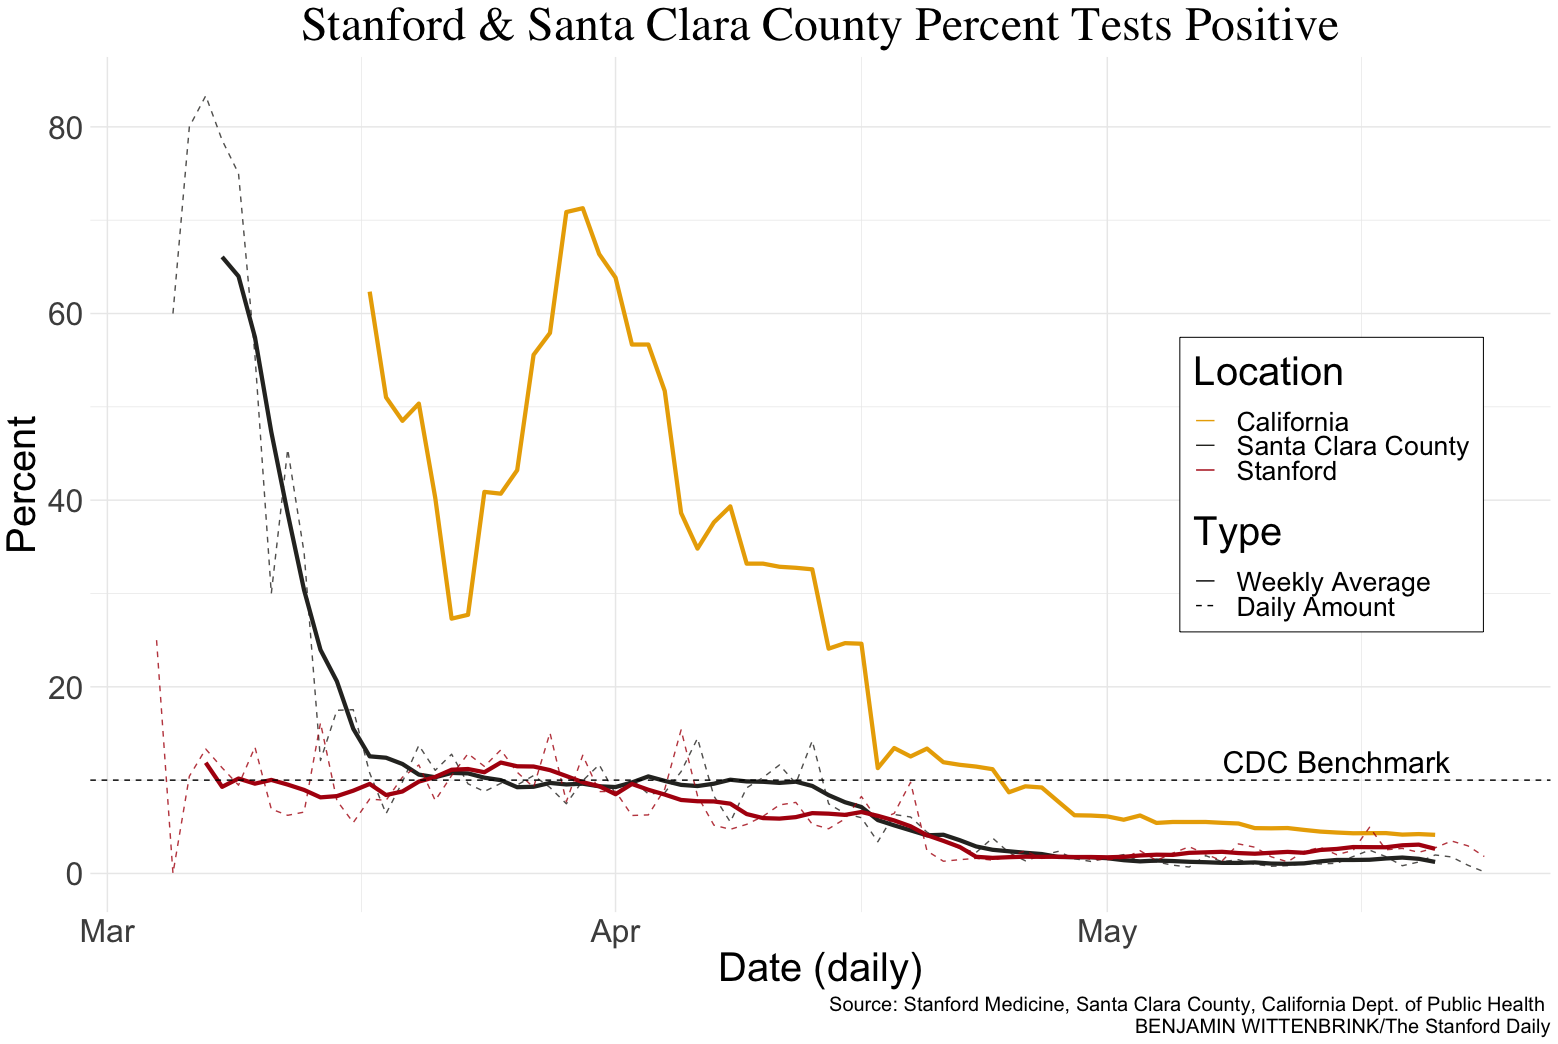 Graph showing the percent of tests positive as reported by Stanford Medicine and Santa Clara County